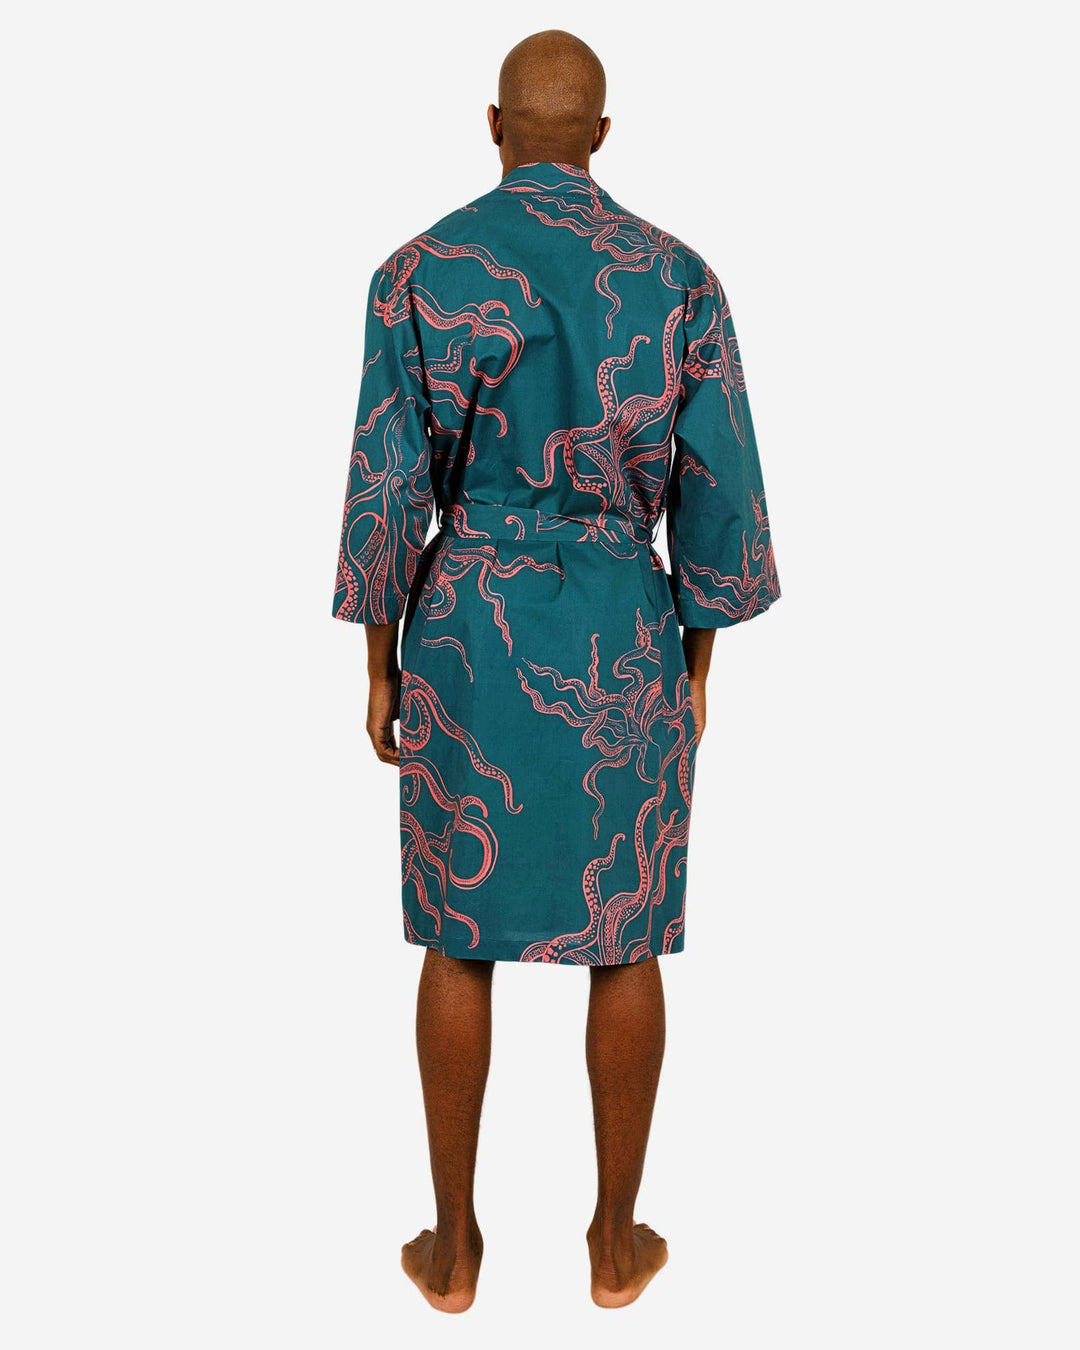 Mens turquoise dressing gown with pink octopuses